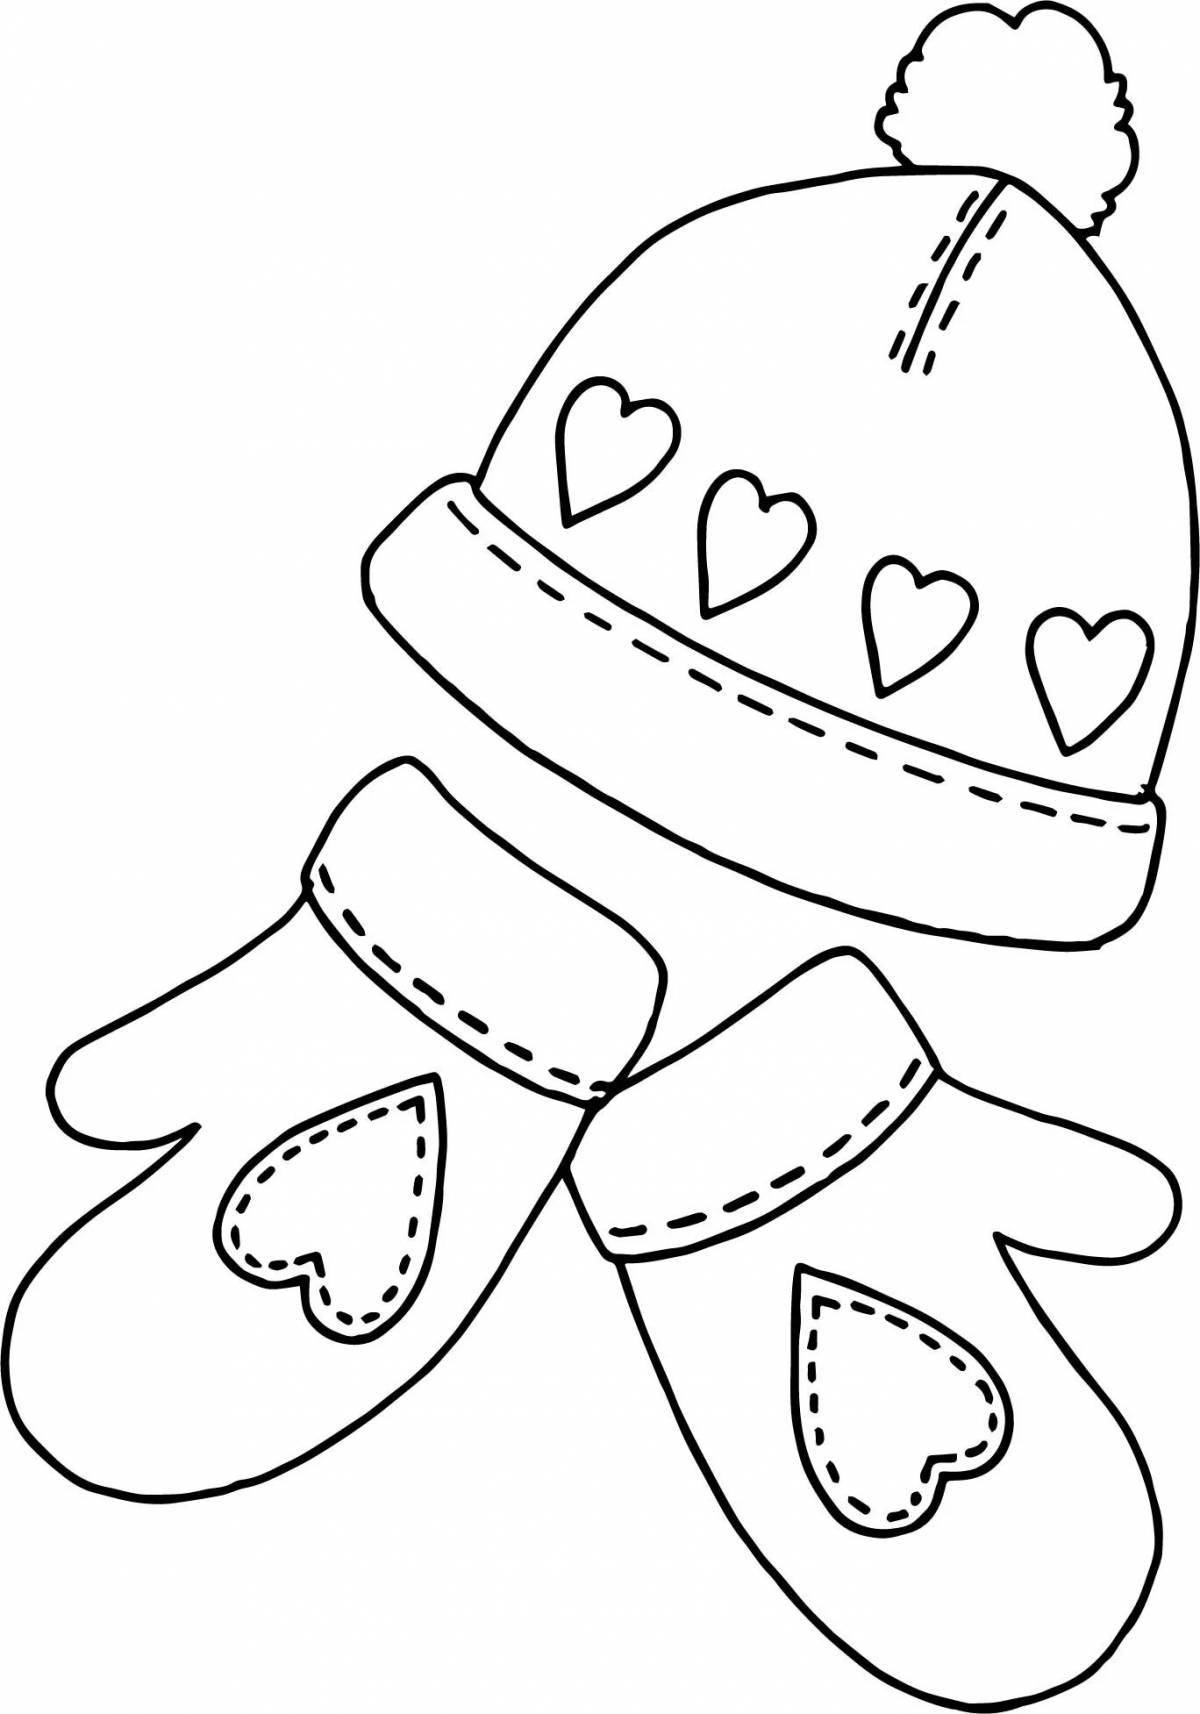 Cute mittens and hat coloring book for kids